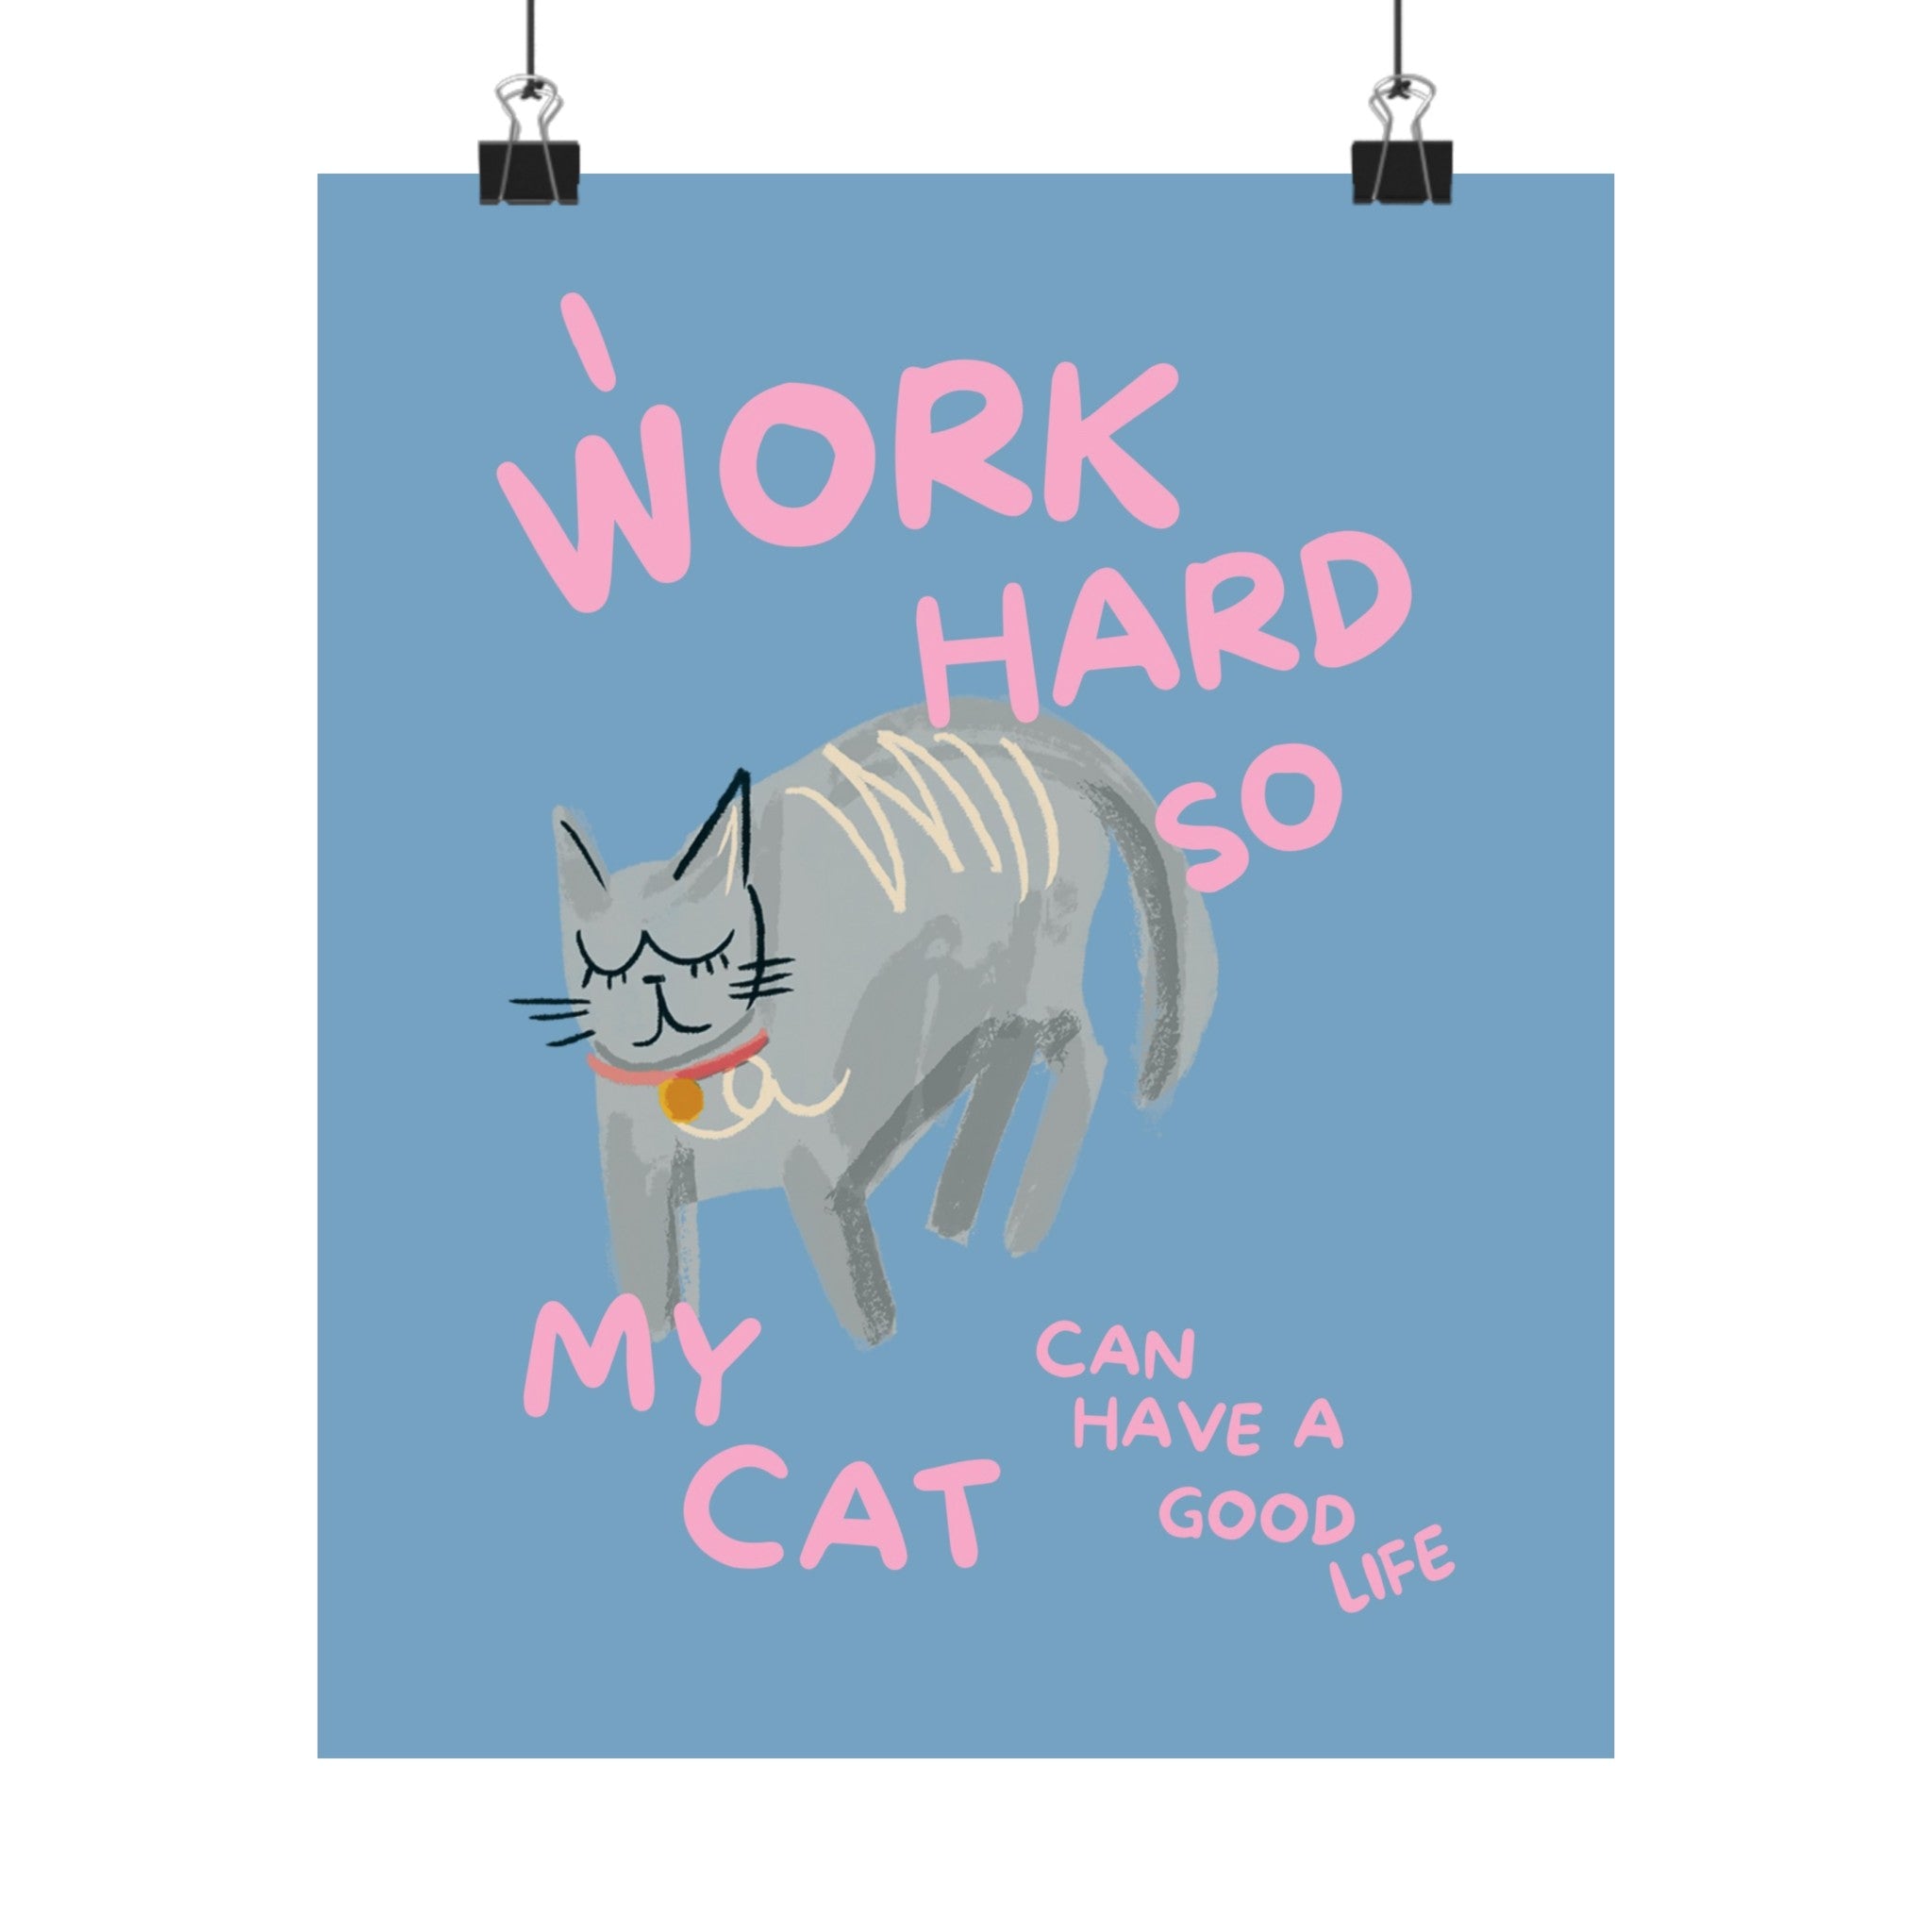 I Work Hard So My Cat Can Have a Good Life Physical Poster